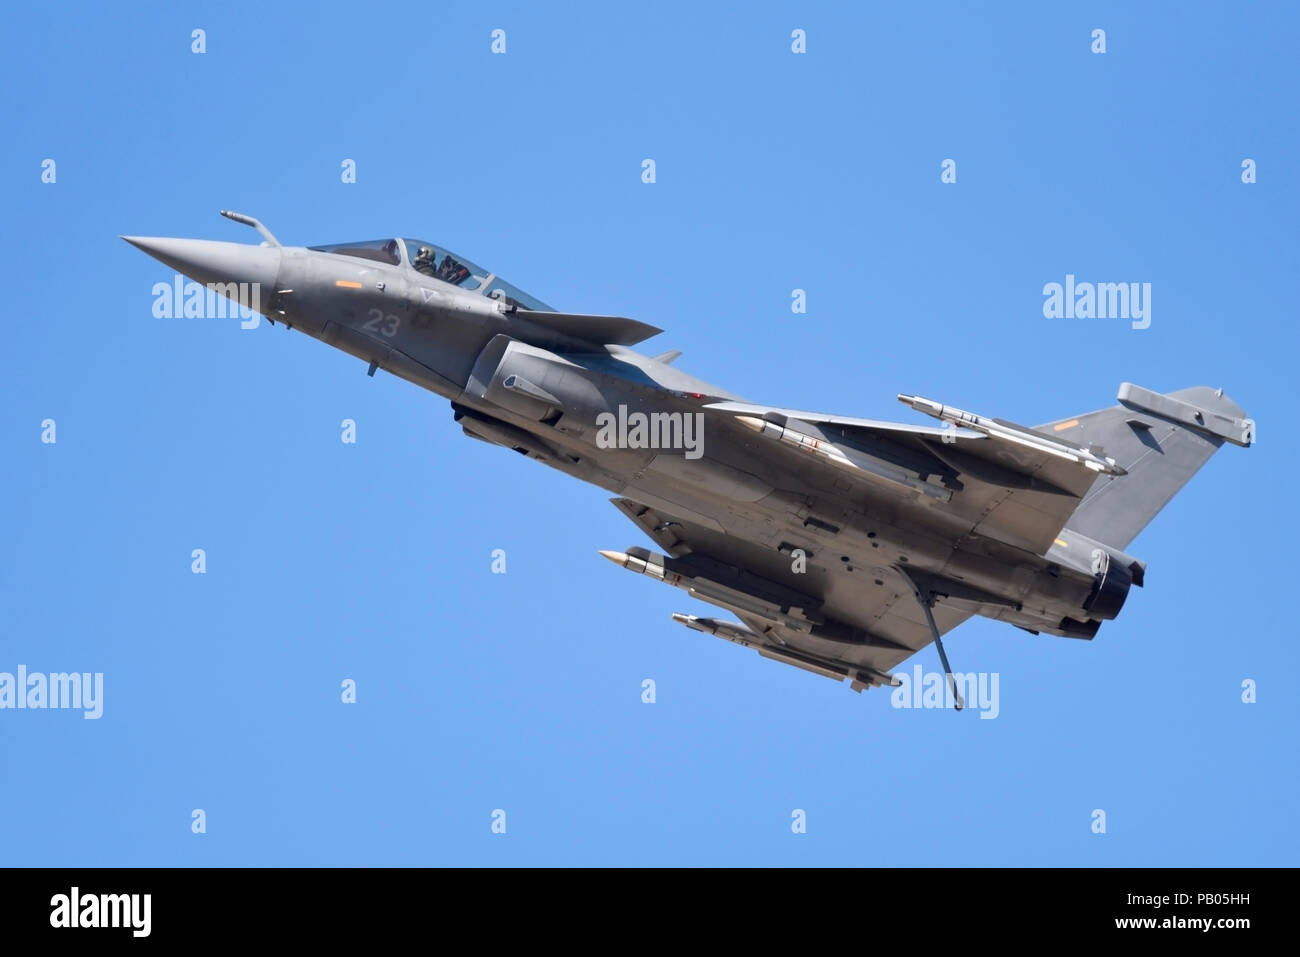 French Naval Aviation Aéronavale Dassault Rafale M flying at the Royal International Air Tattoo, RIAT, RAF Fairford, UK. Stock Photo